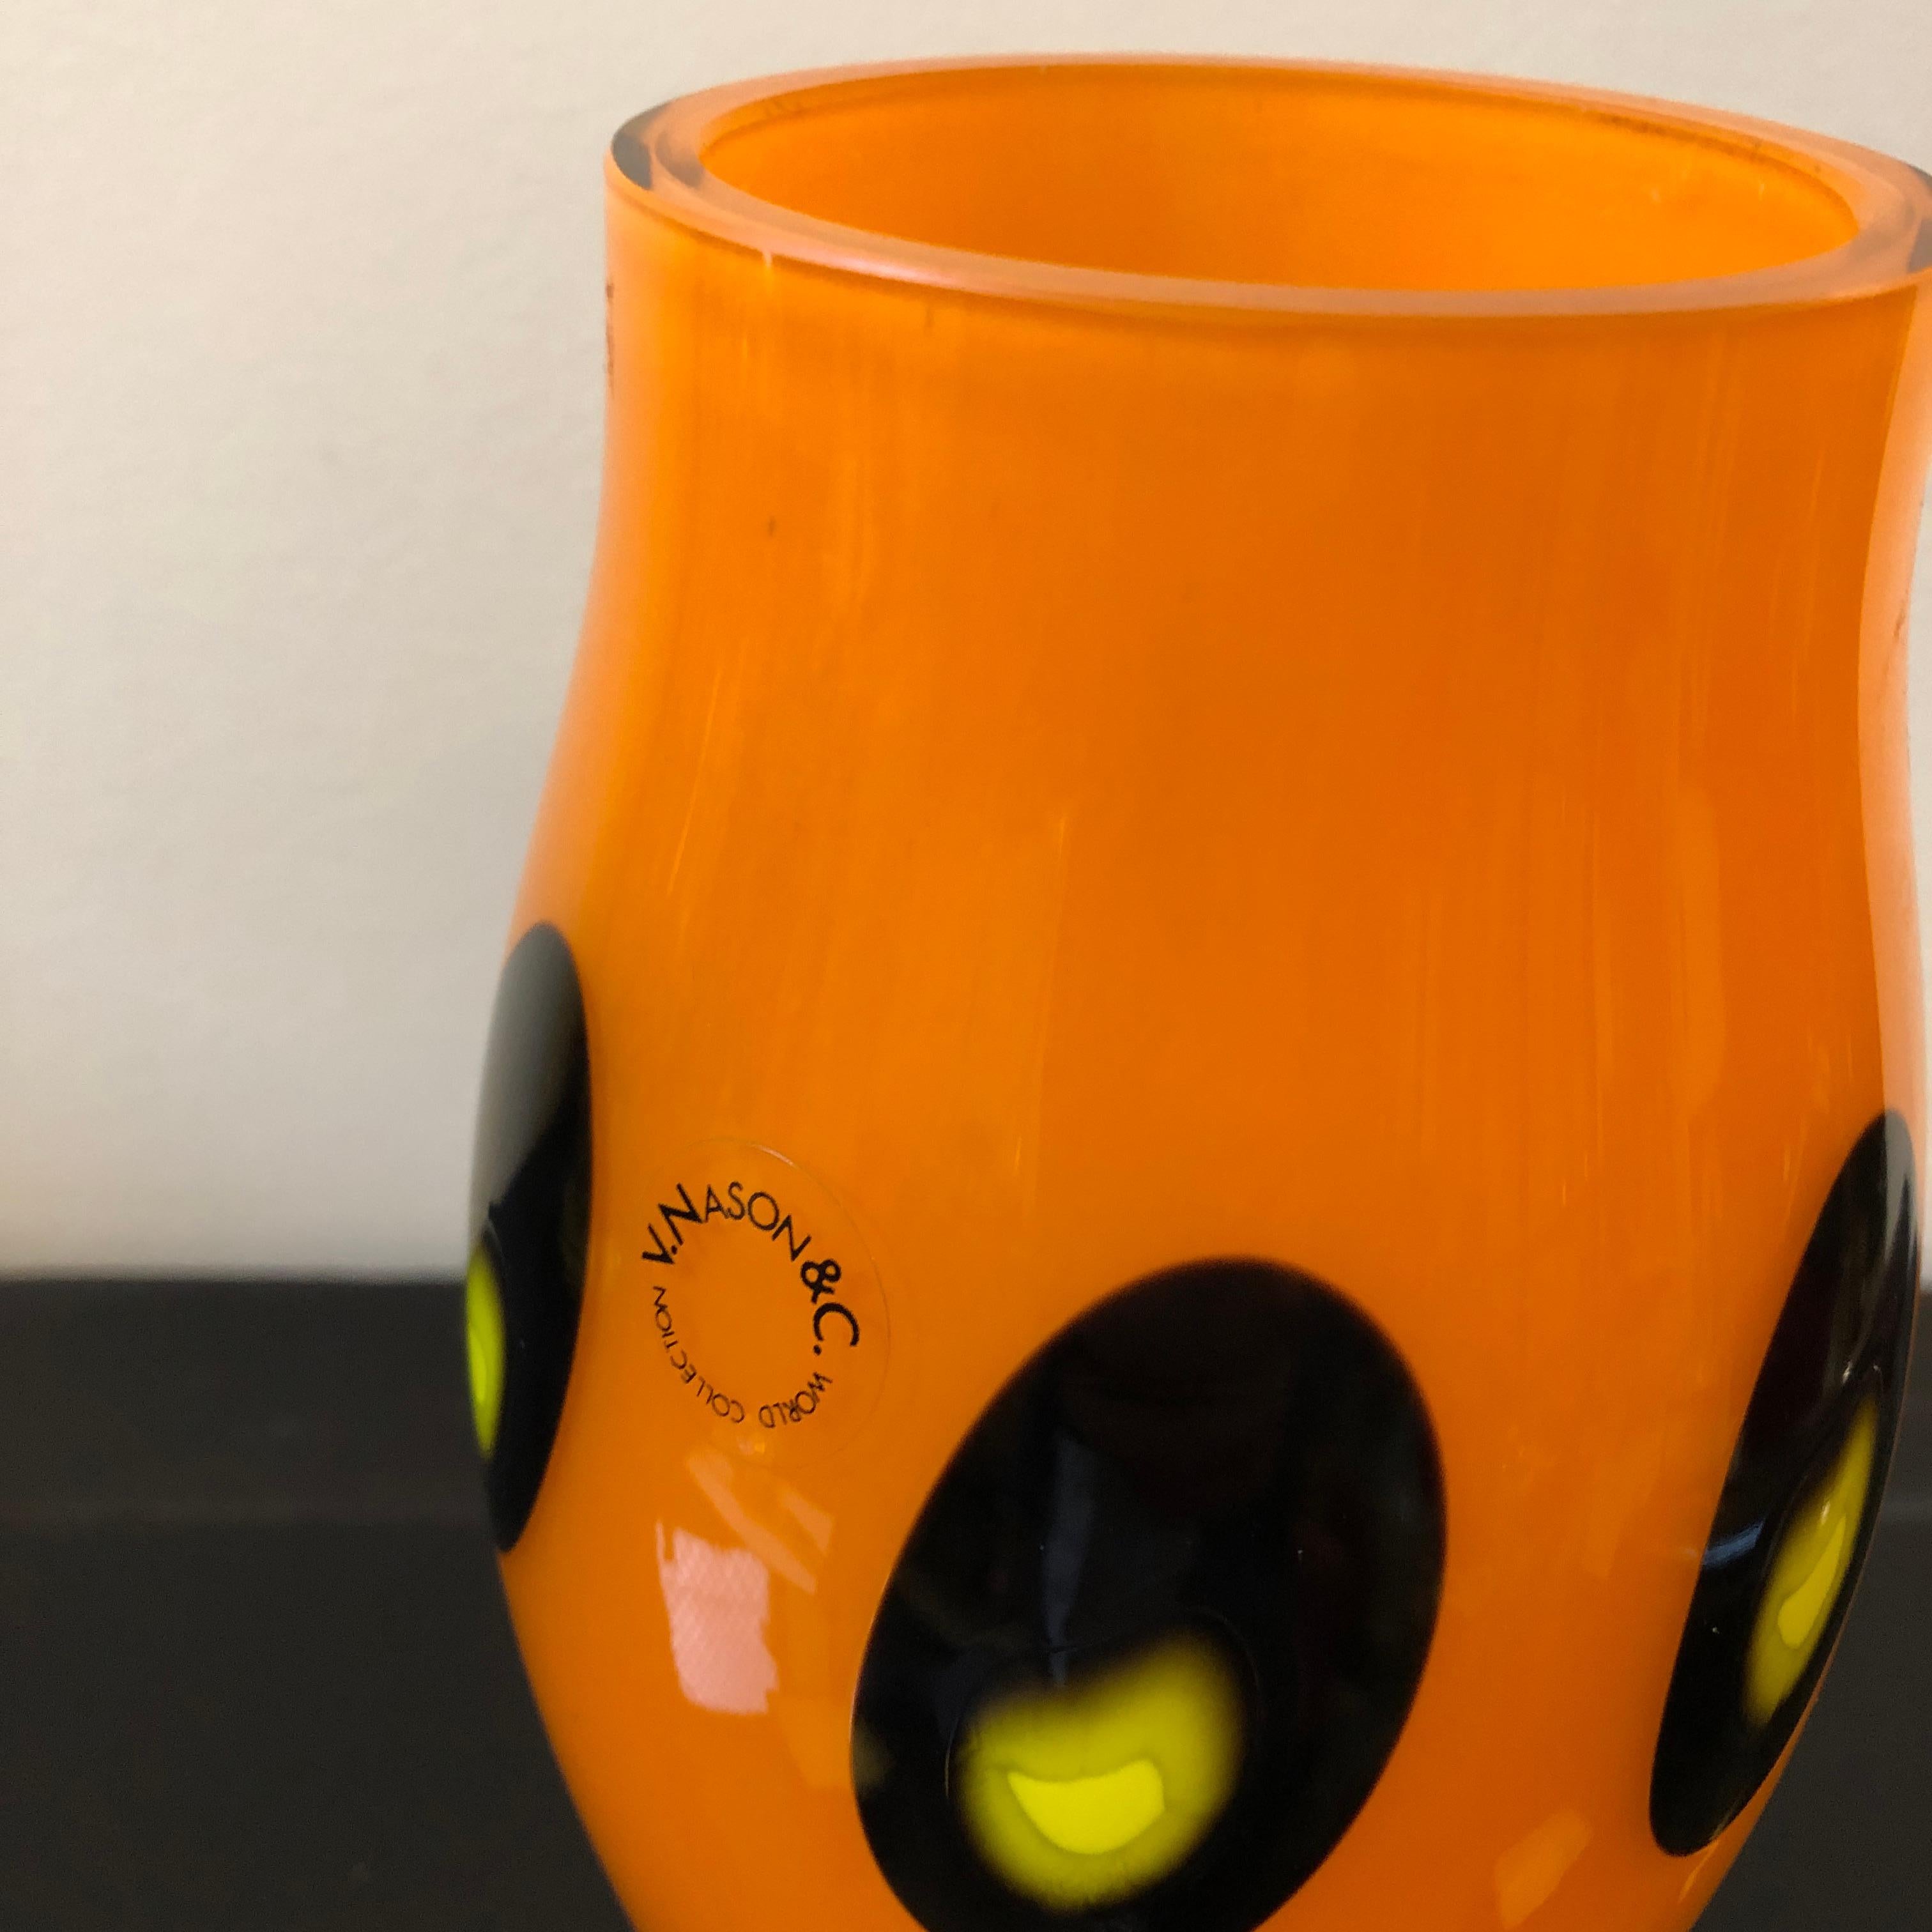 A orange black and yellow round vase by V. Nason & Co. made in Italy in the 1970s, perfect conditions, probably never used. Labeled and signed on the base.